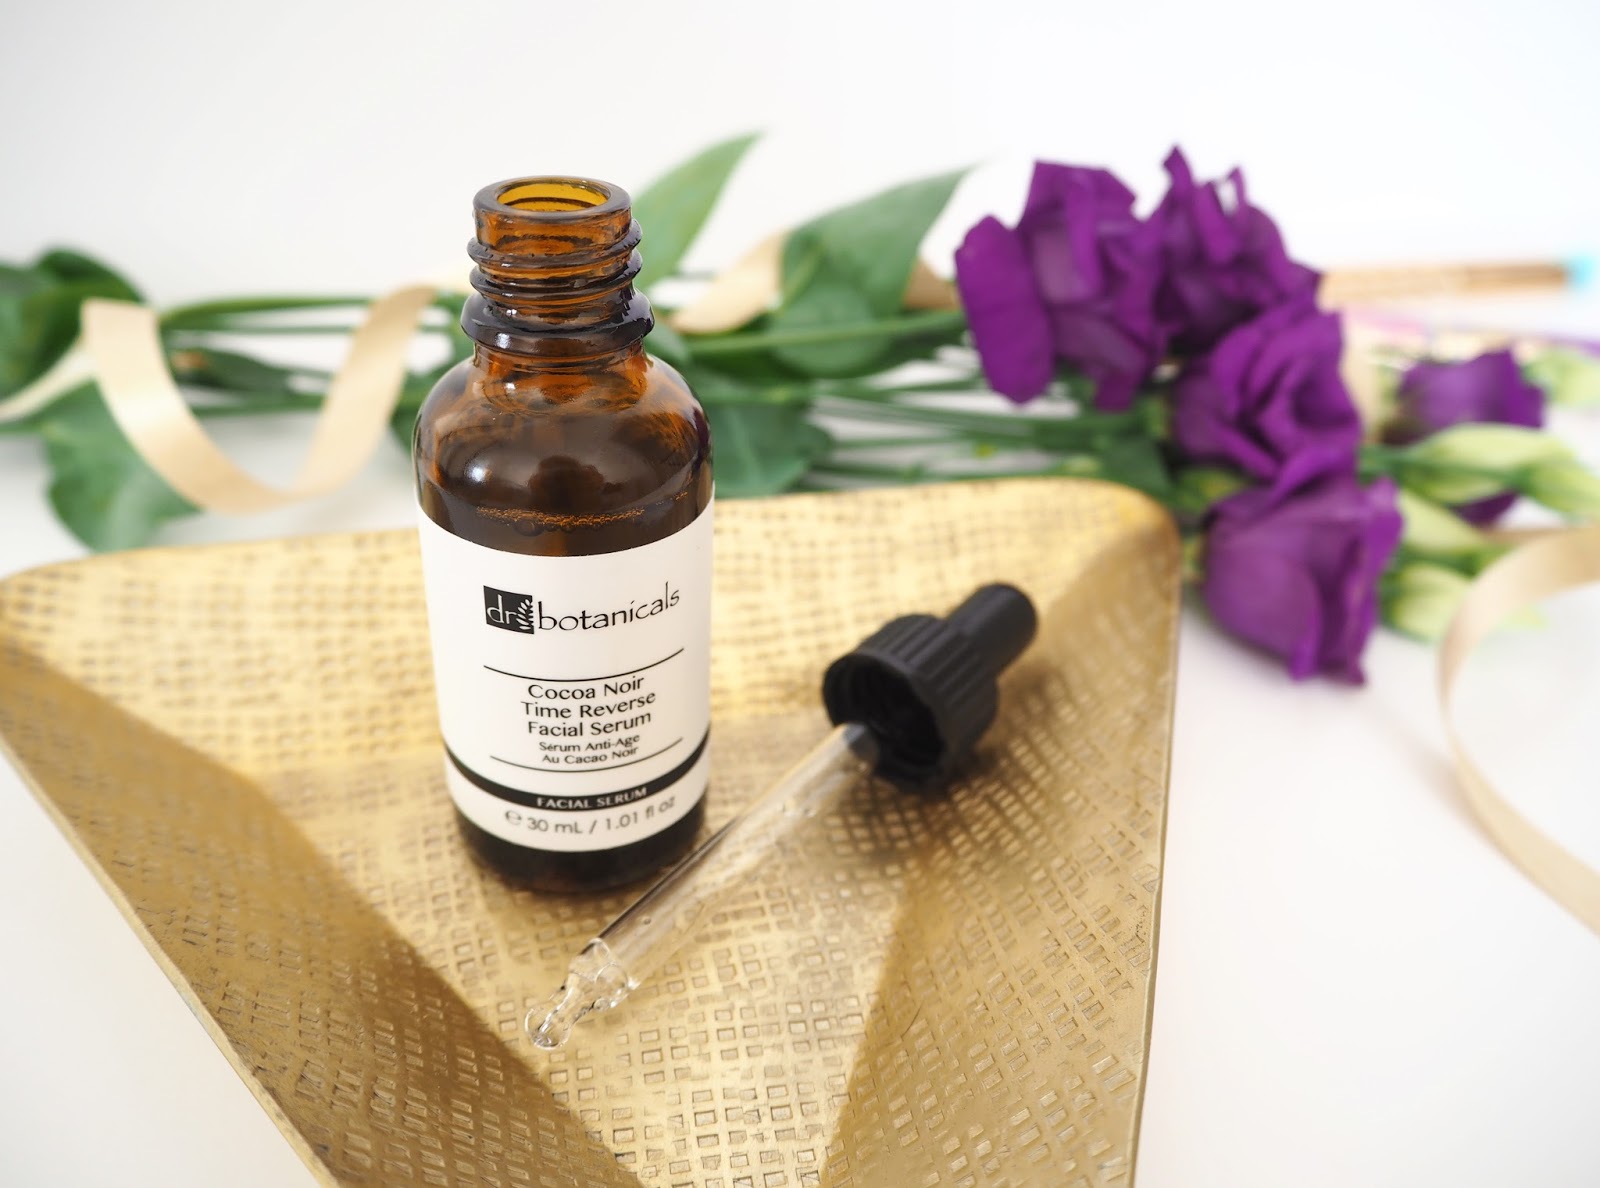 Dr Botanicals Cocoa Noir Time Reverse Facial Serum, Katie Kirk Loves, Beauty Blogger, Dr Botanicals Skincare, UK Blogger, Skincare Review, Discount Code, Beauty Sleep, Facial Serum, Facial Treatment, Skincare Routine, Luxury Skincare Products